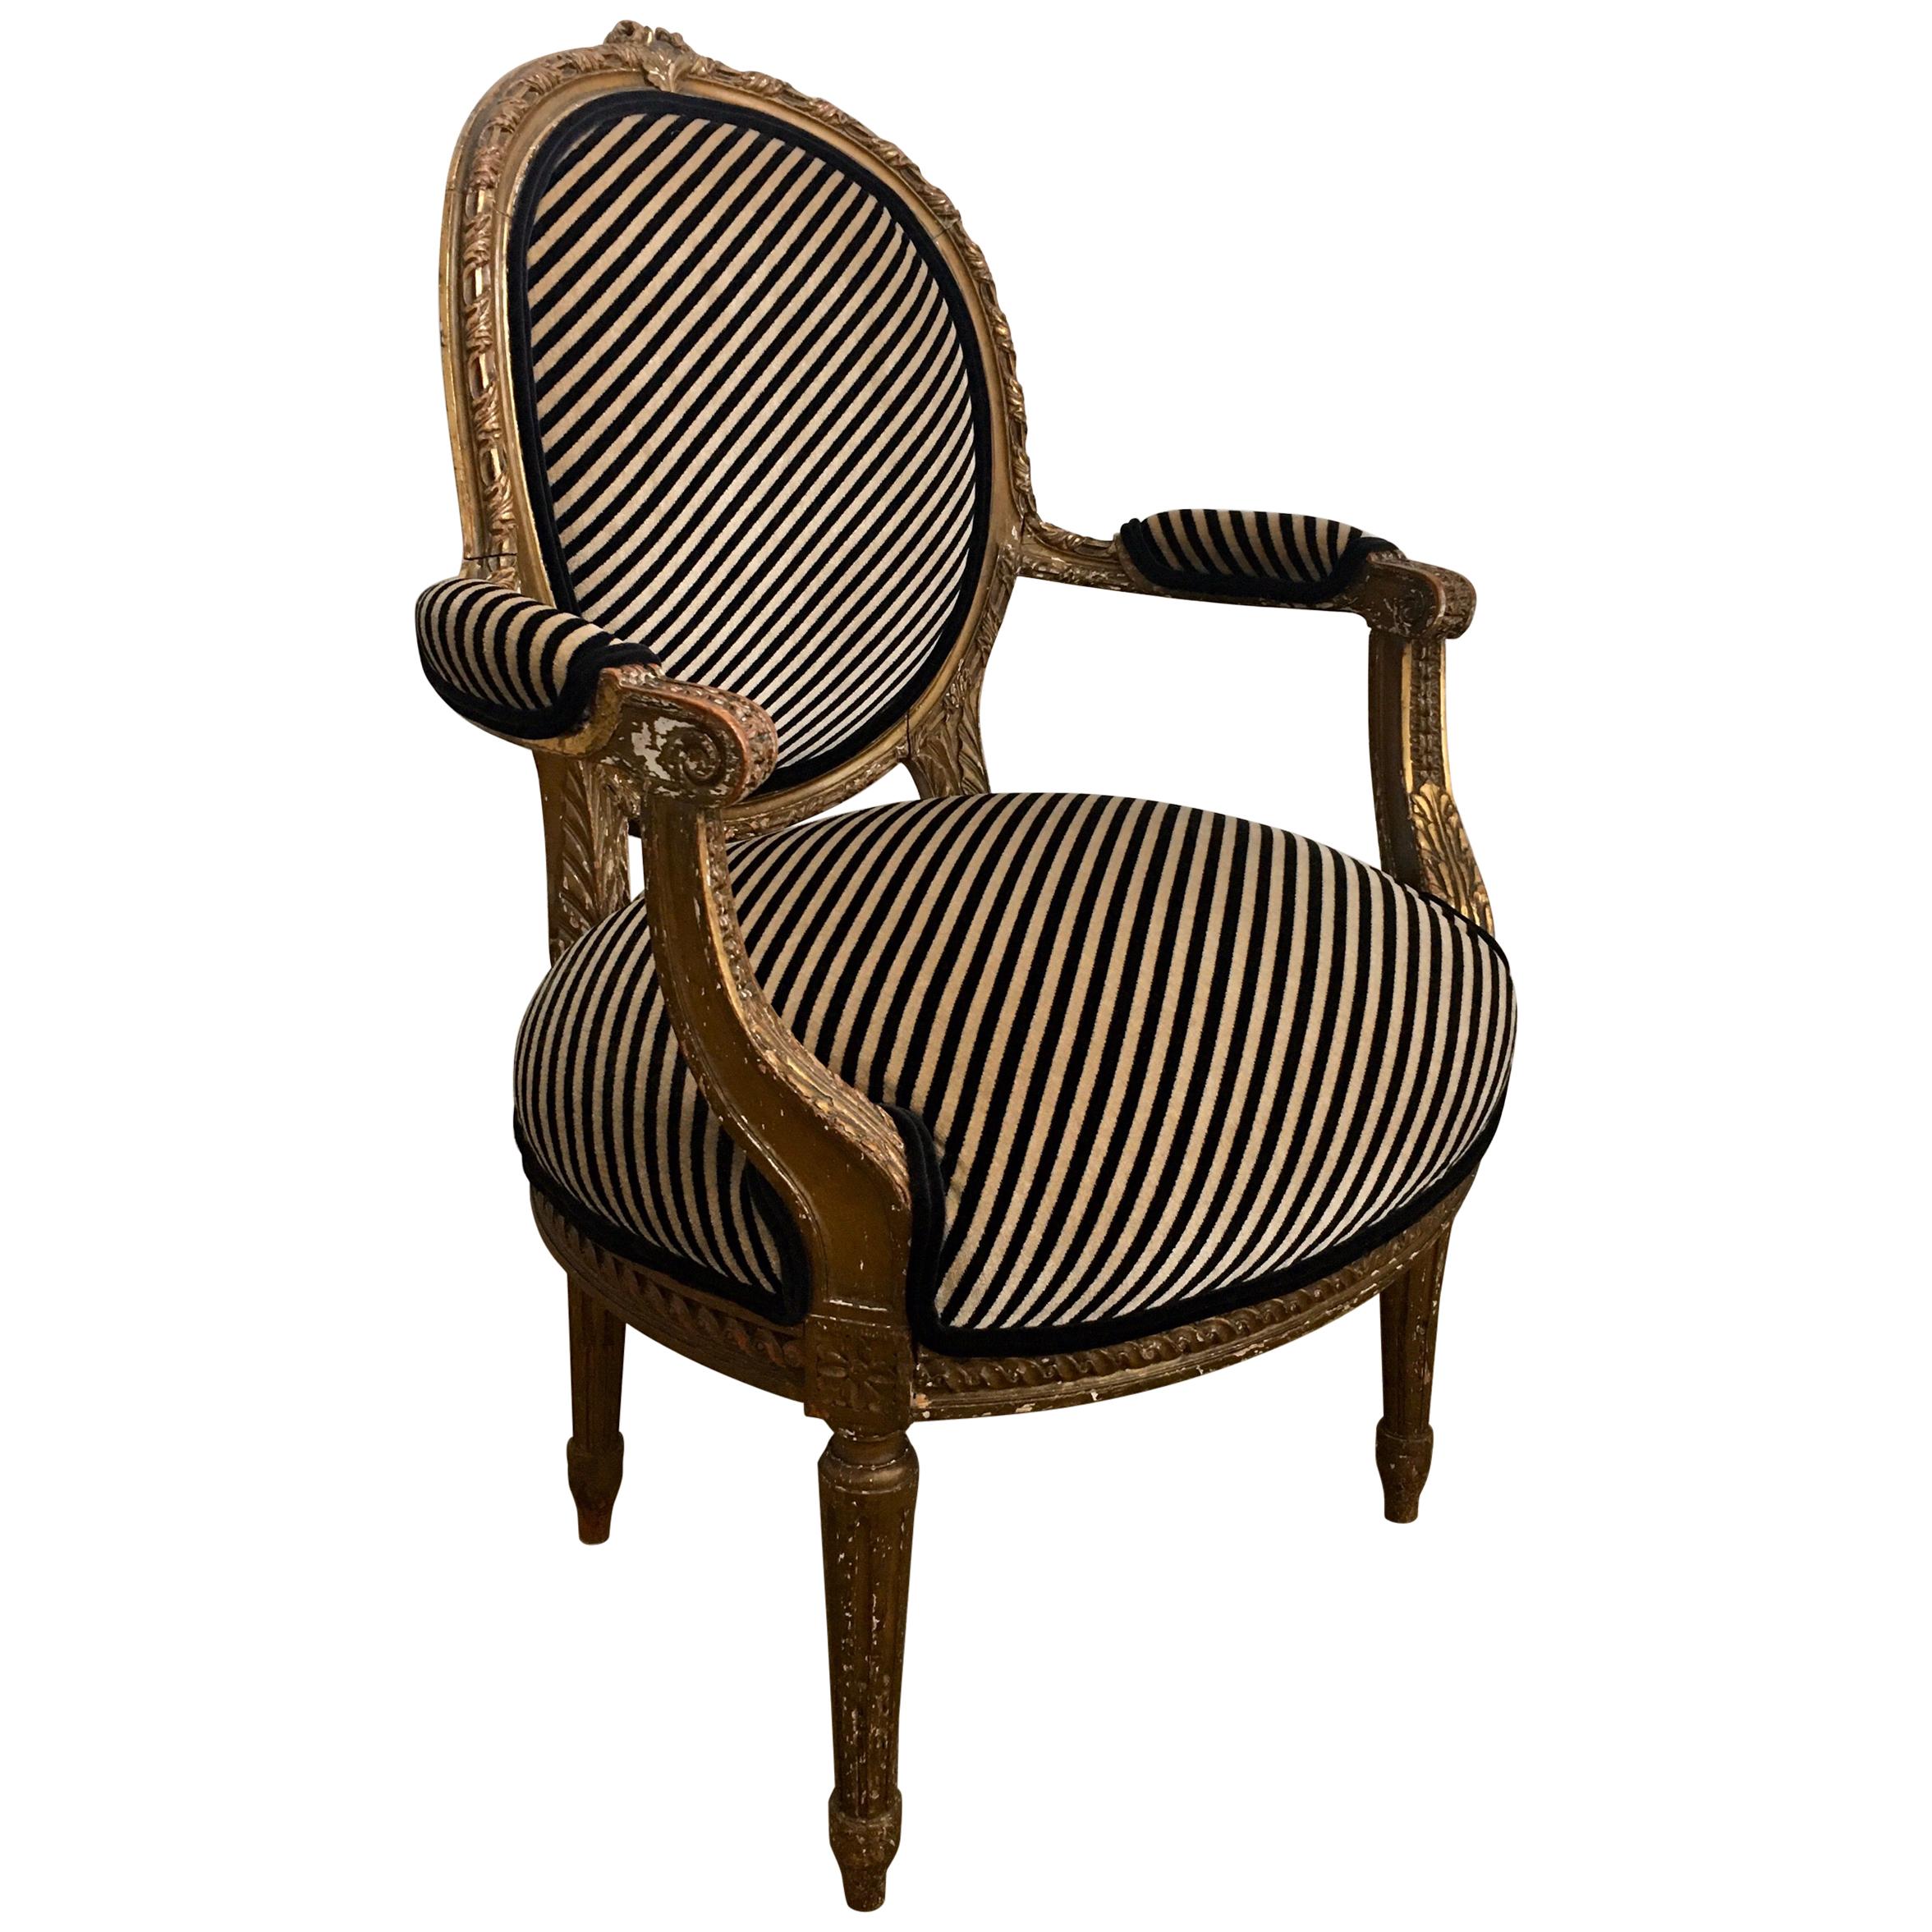 Louis XVI Style Carved Giltwood Fauteuil Armchair with Modern Stripe Upholstery